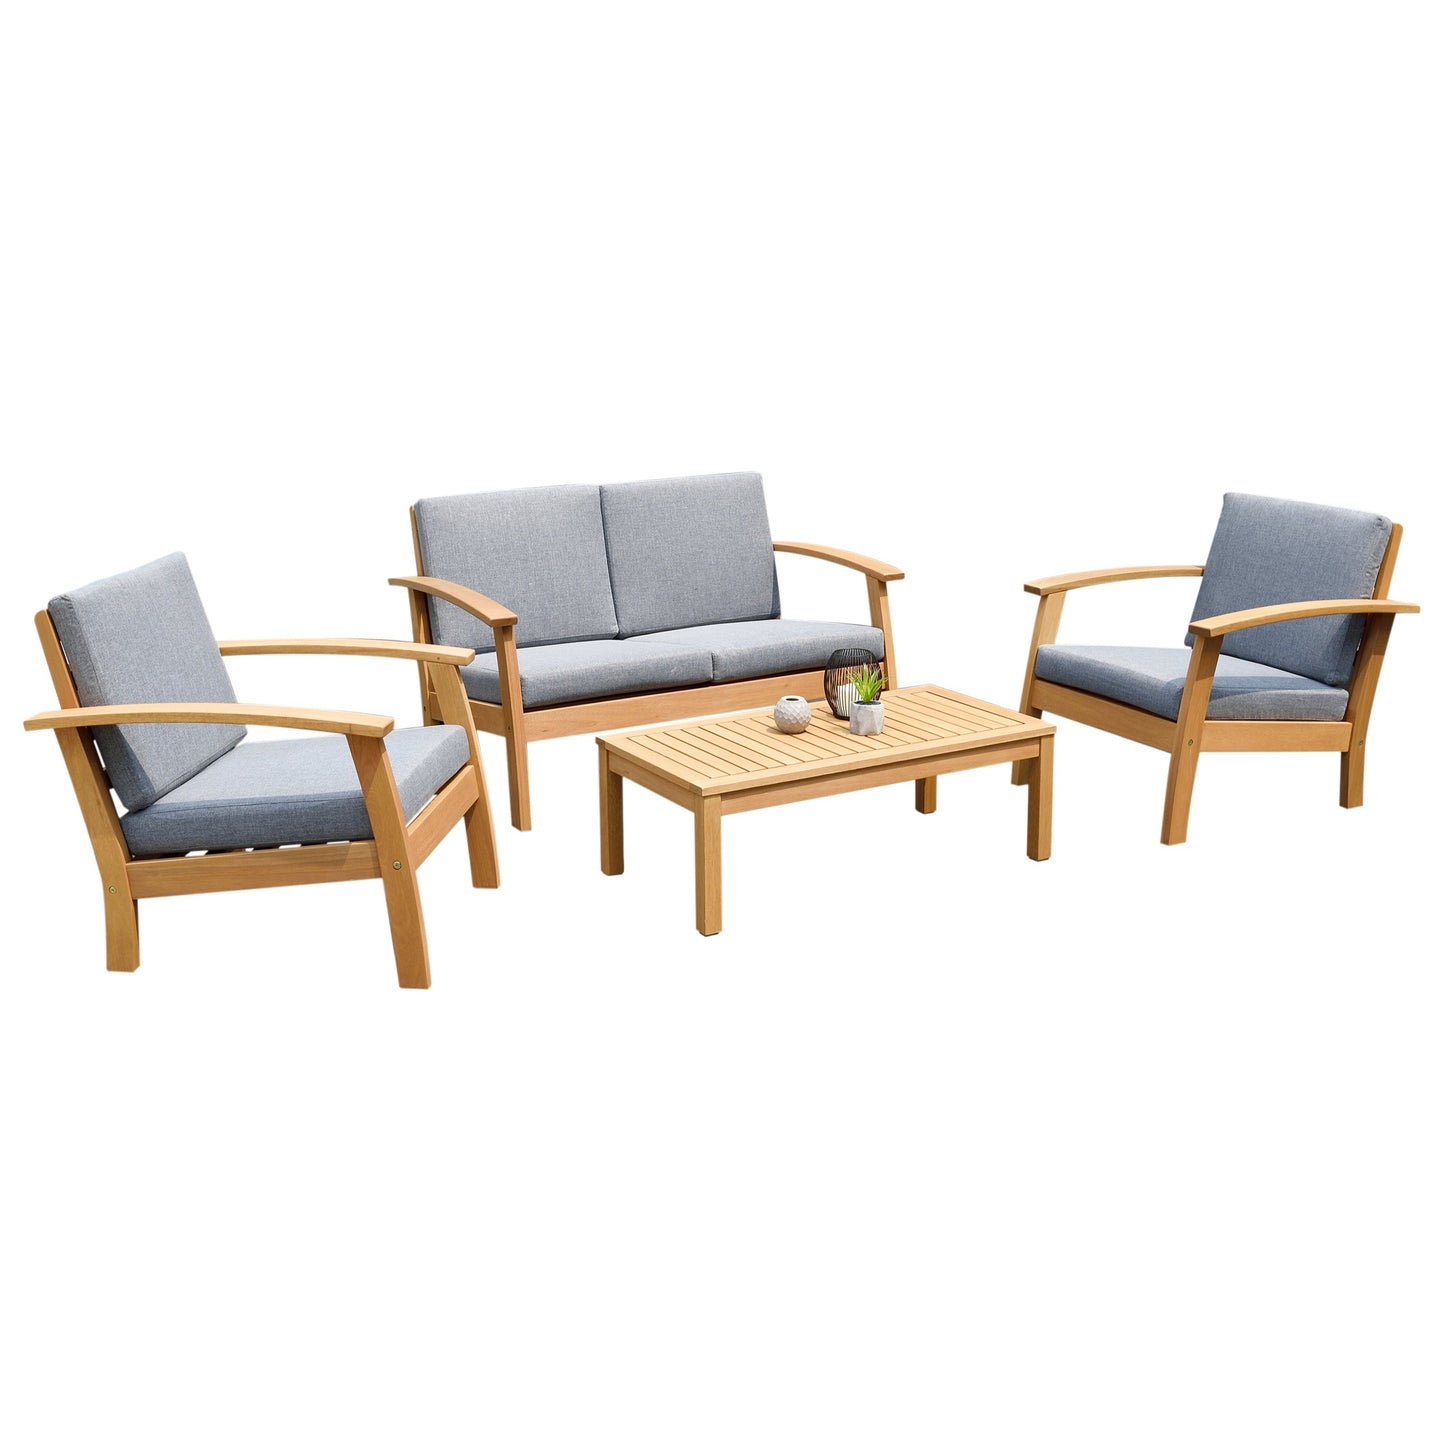 Kingsbury Teak Finish 100% FSC Certified Solid Wood With White Cushion Seating